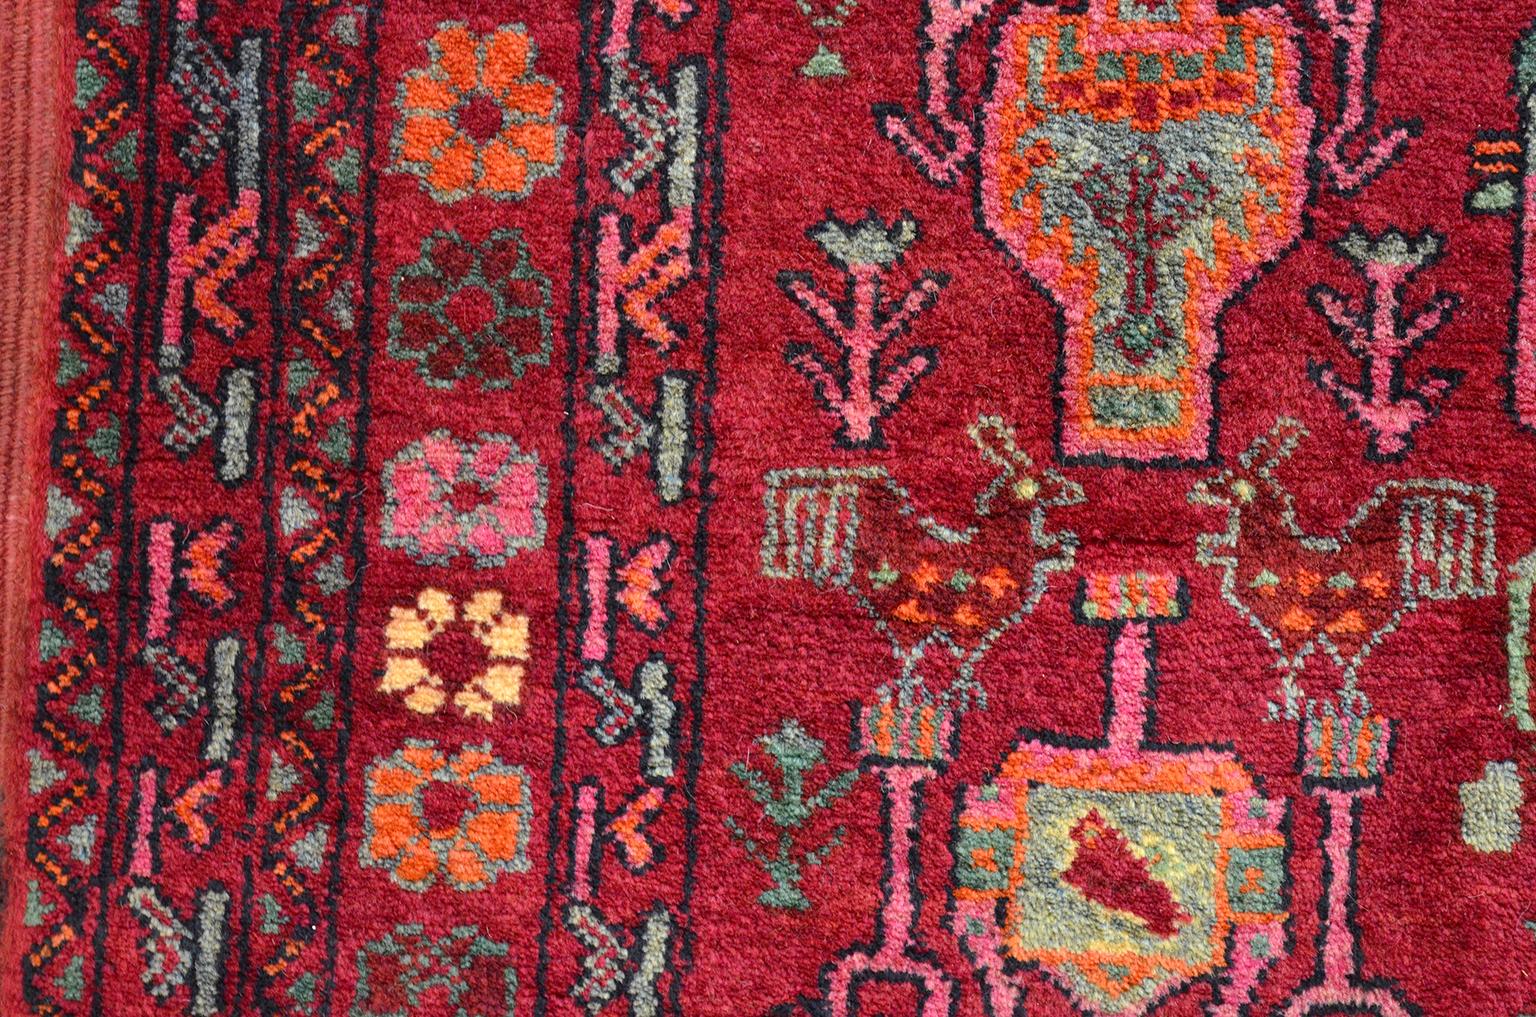 Vintage 1940s Wool Persian Belouchi Rug, Peacock Design, 5' x 9' In Good Condition For Sale In New York, NY